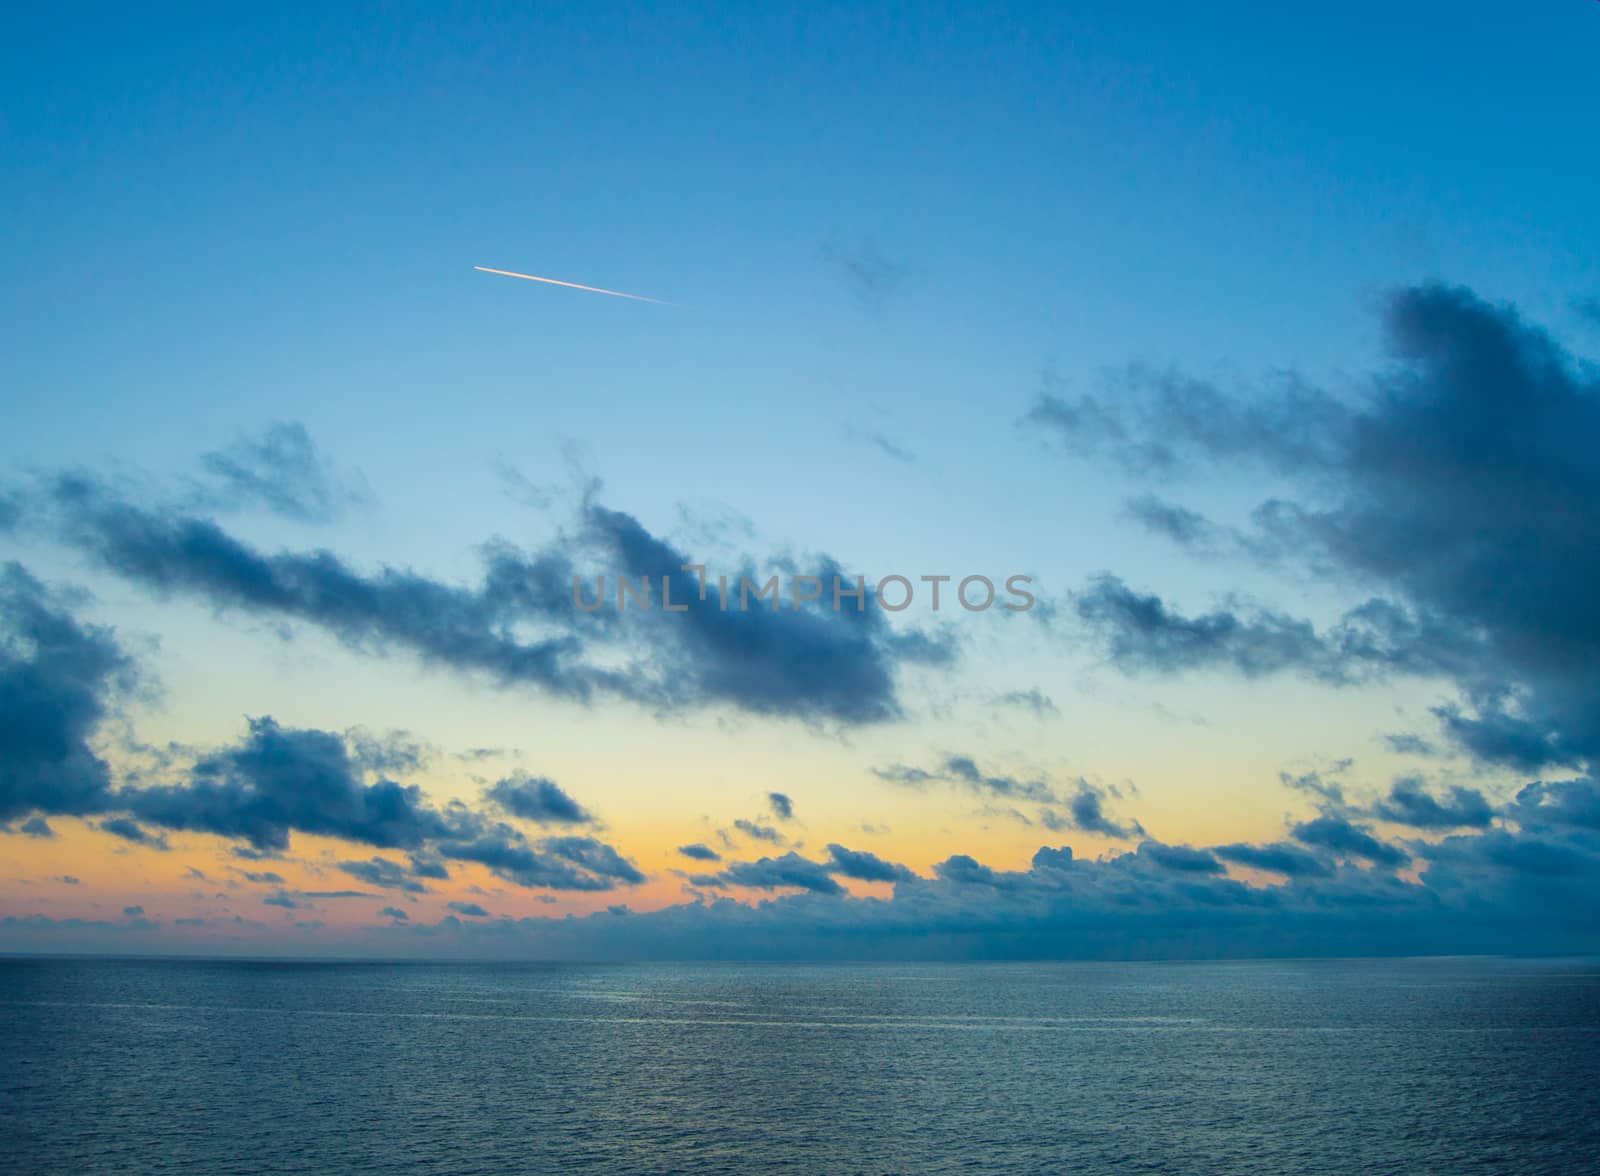 The trail of a jet over the sea on the background of a beautiful Golden sunset by claire_lucia